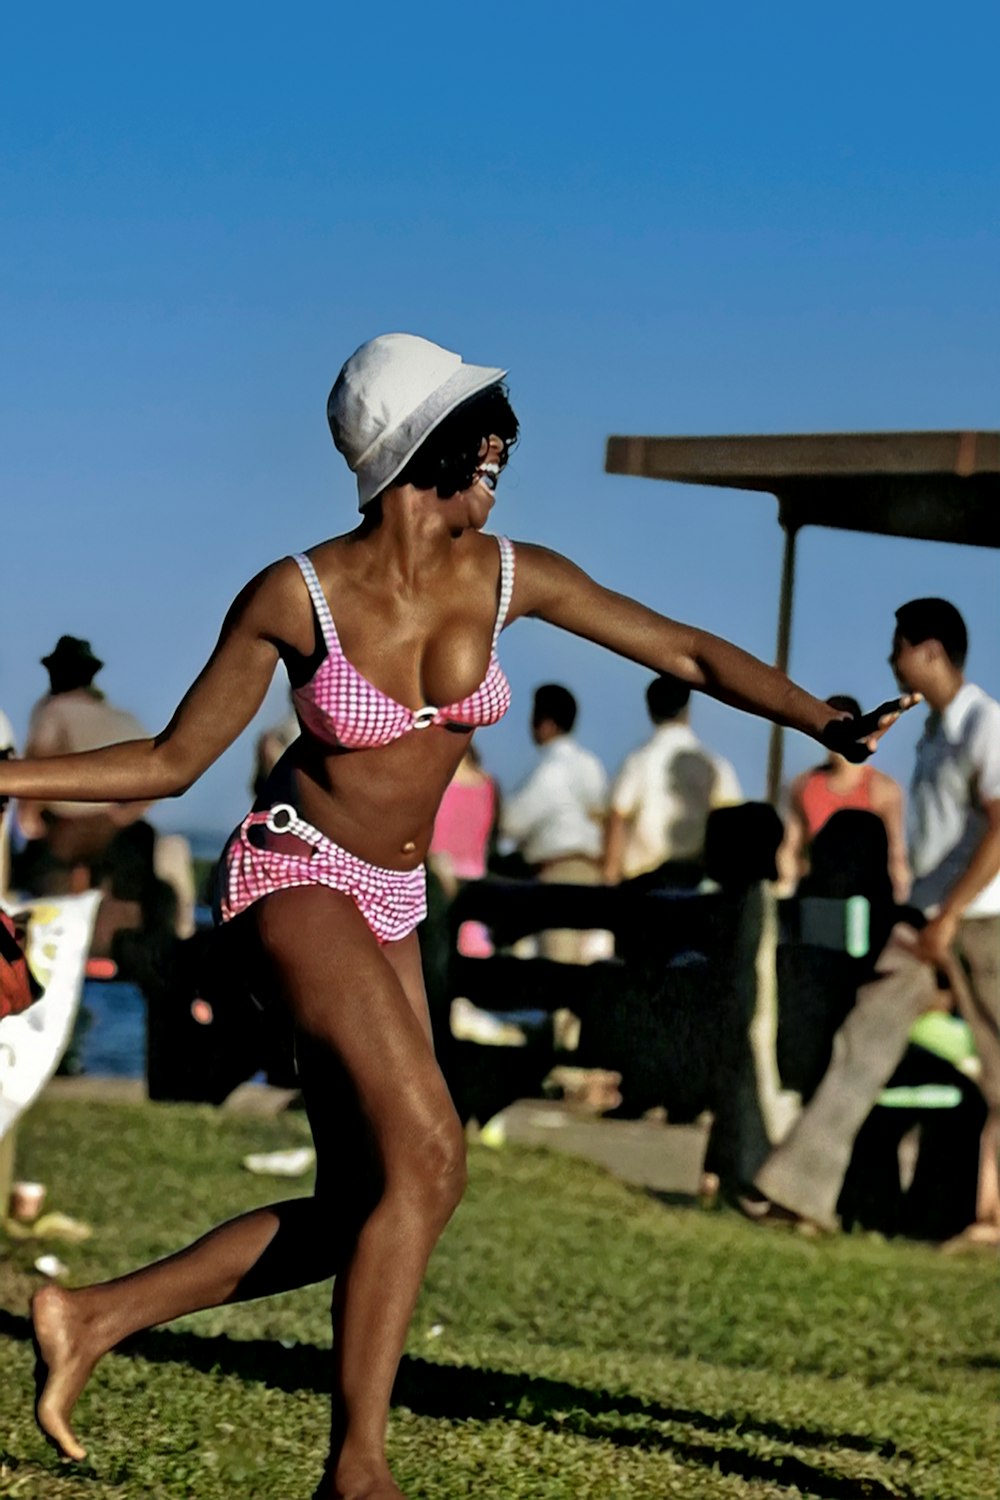 a woman in a bikini and hat playing frisbee